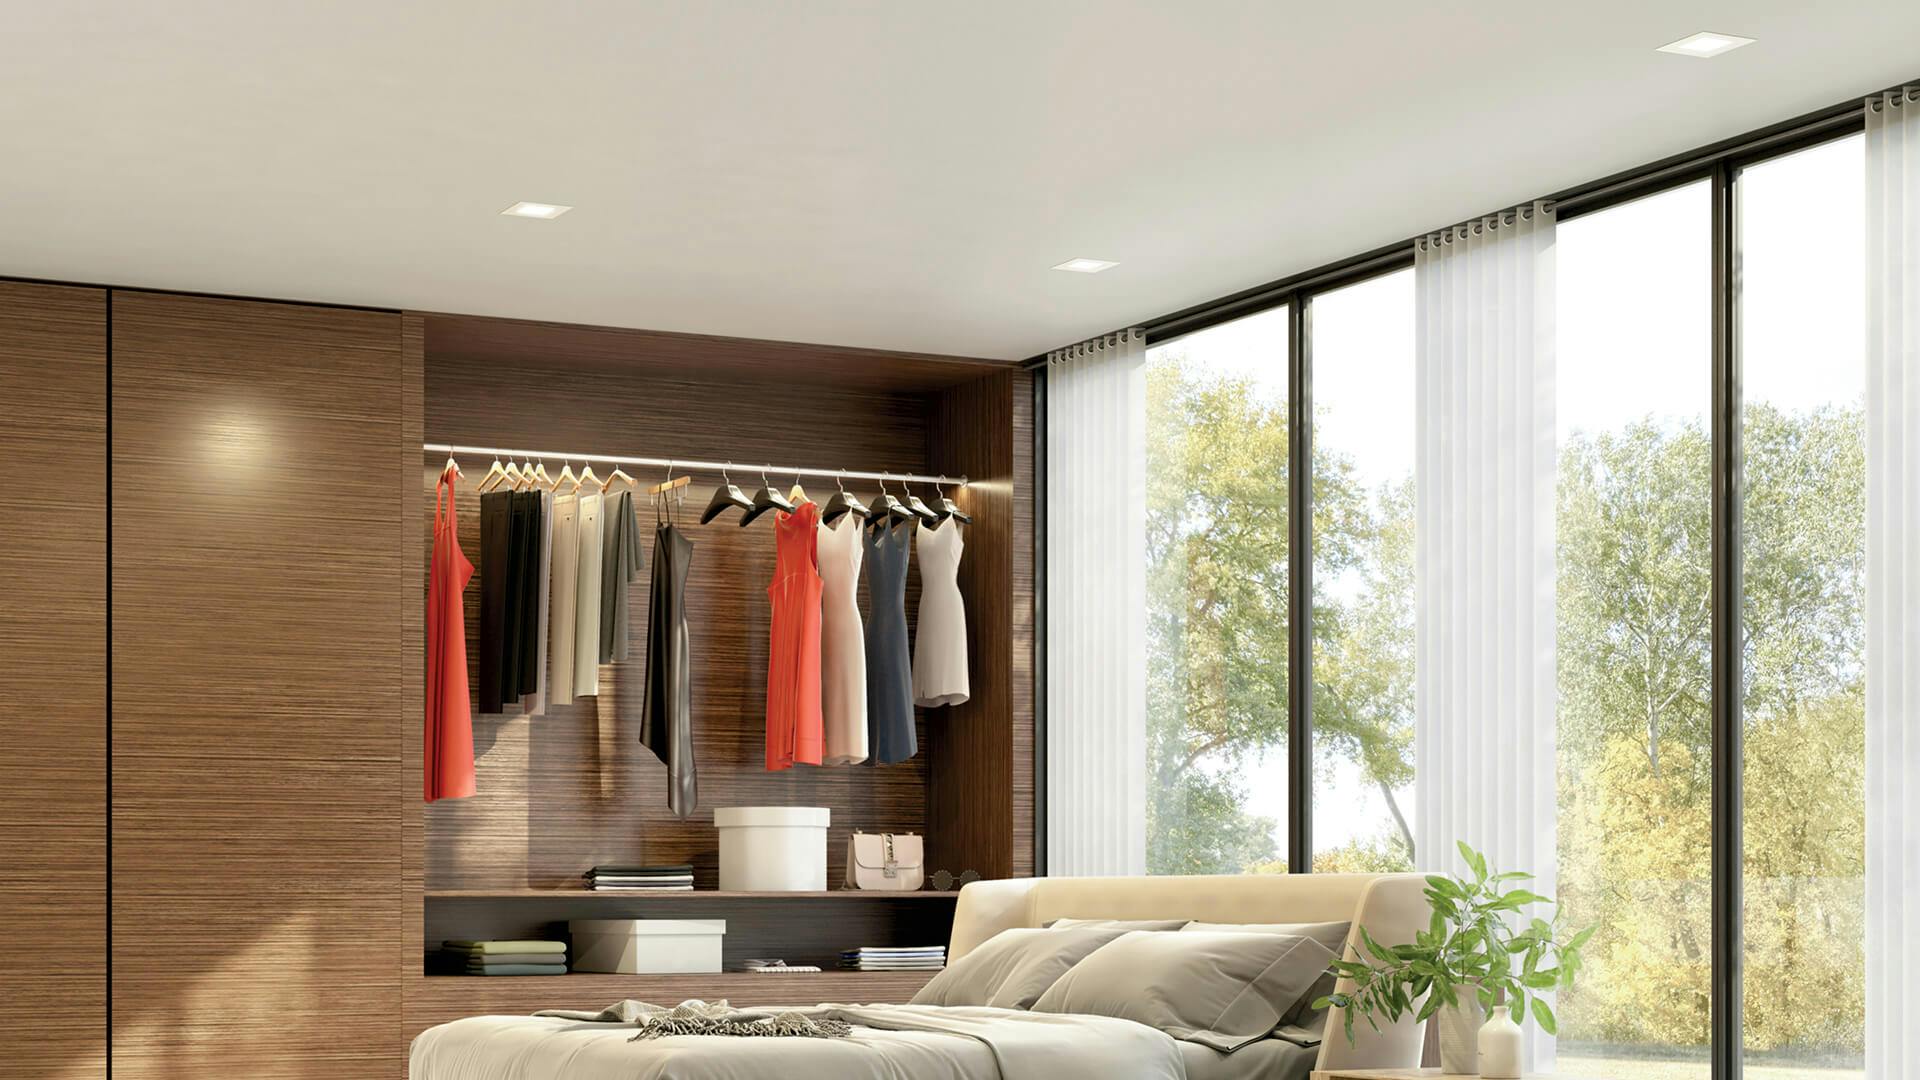 Lifestyle image of a bedroom with DTC flush ceiling lights 